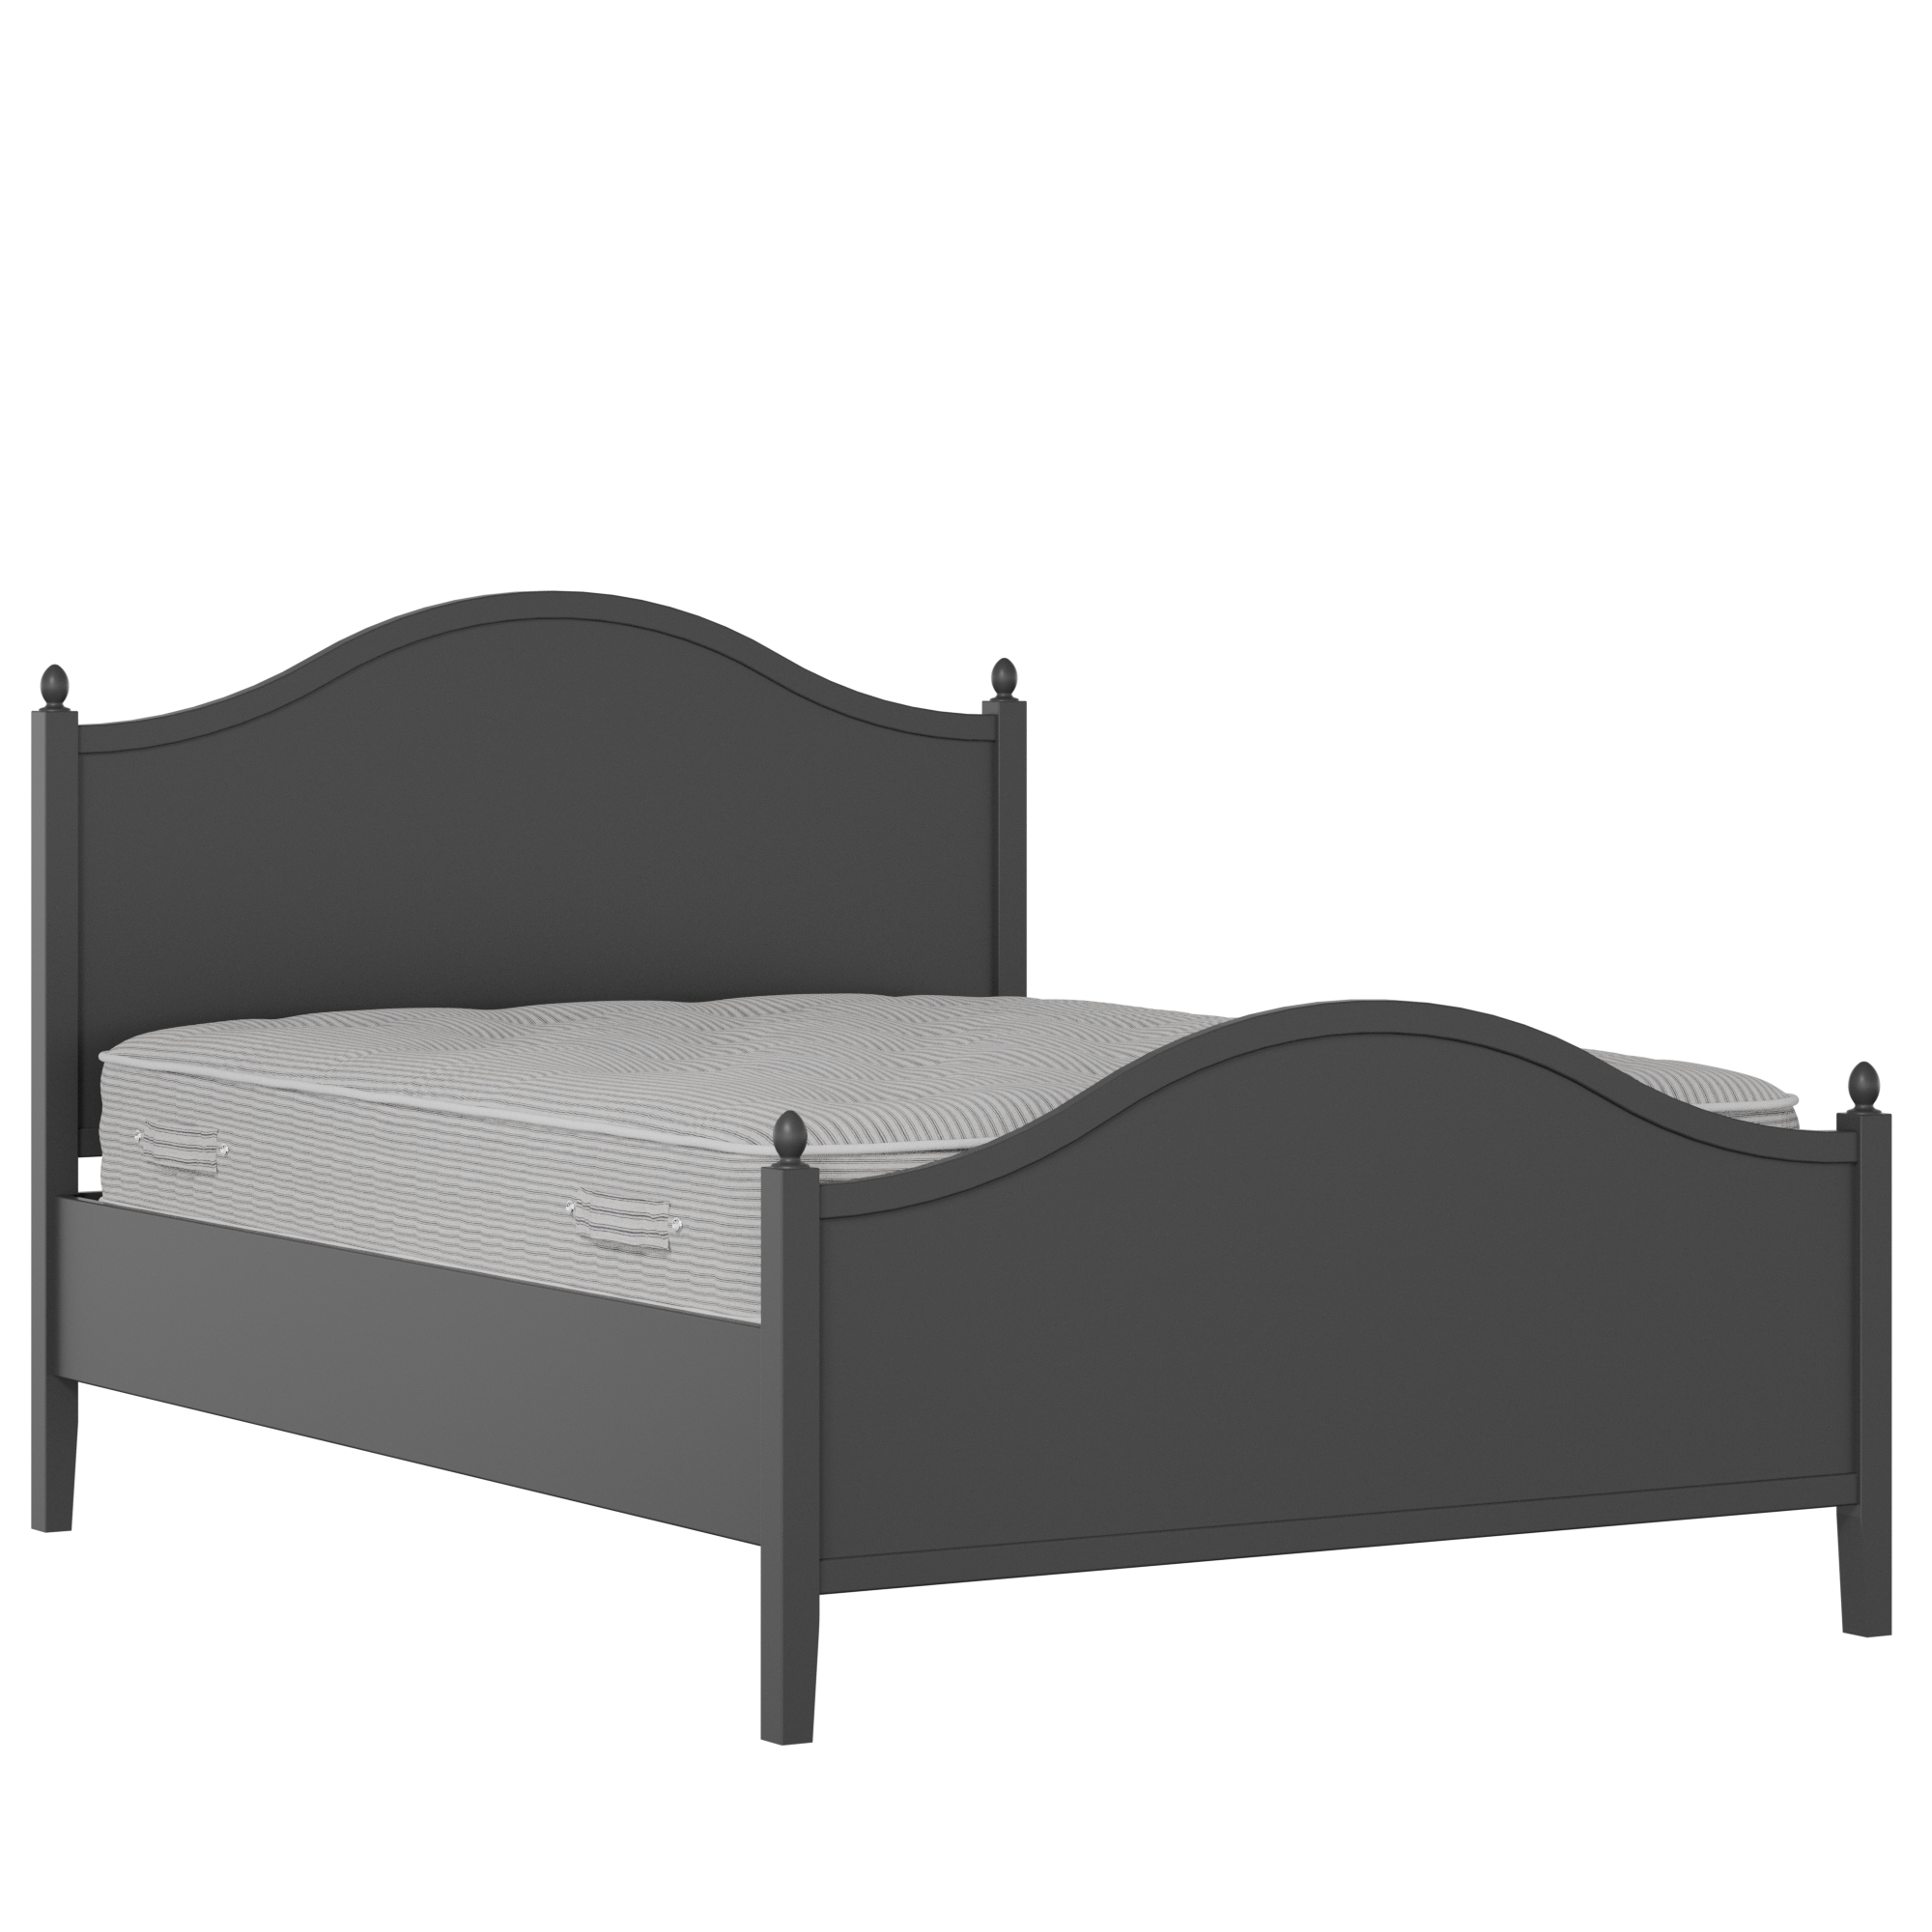 Brady Painted painted wood bed in black with Juno mattress